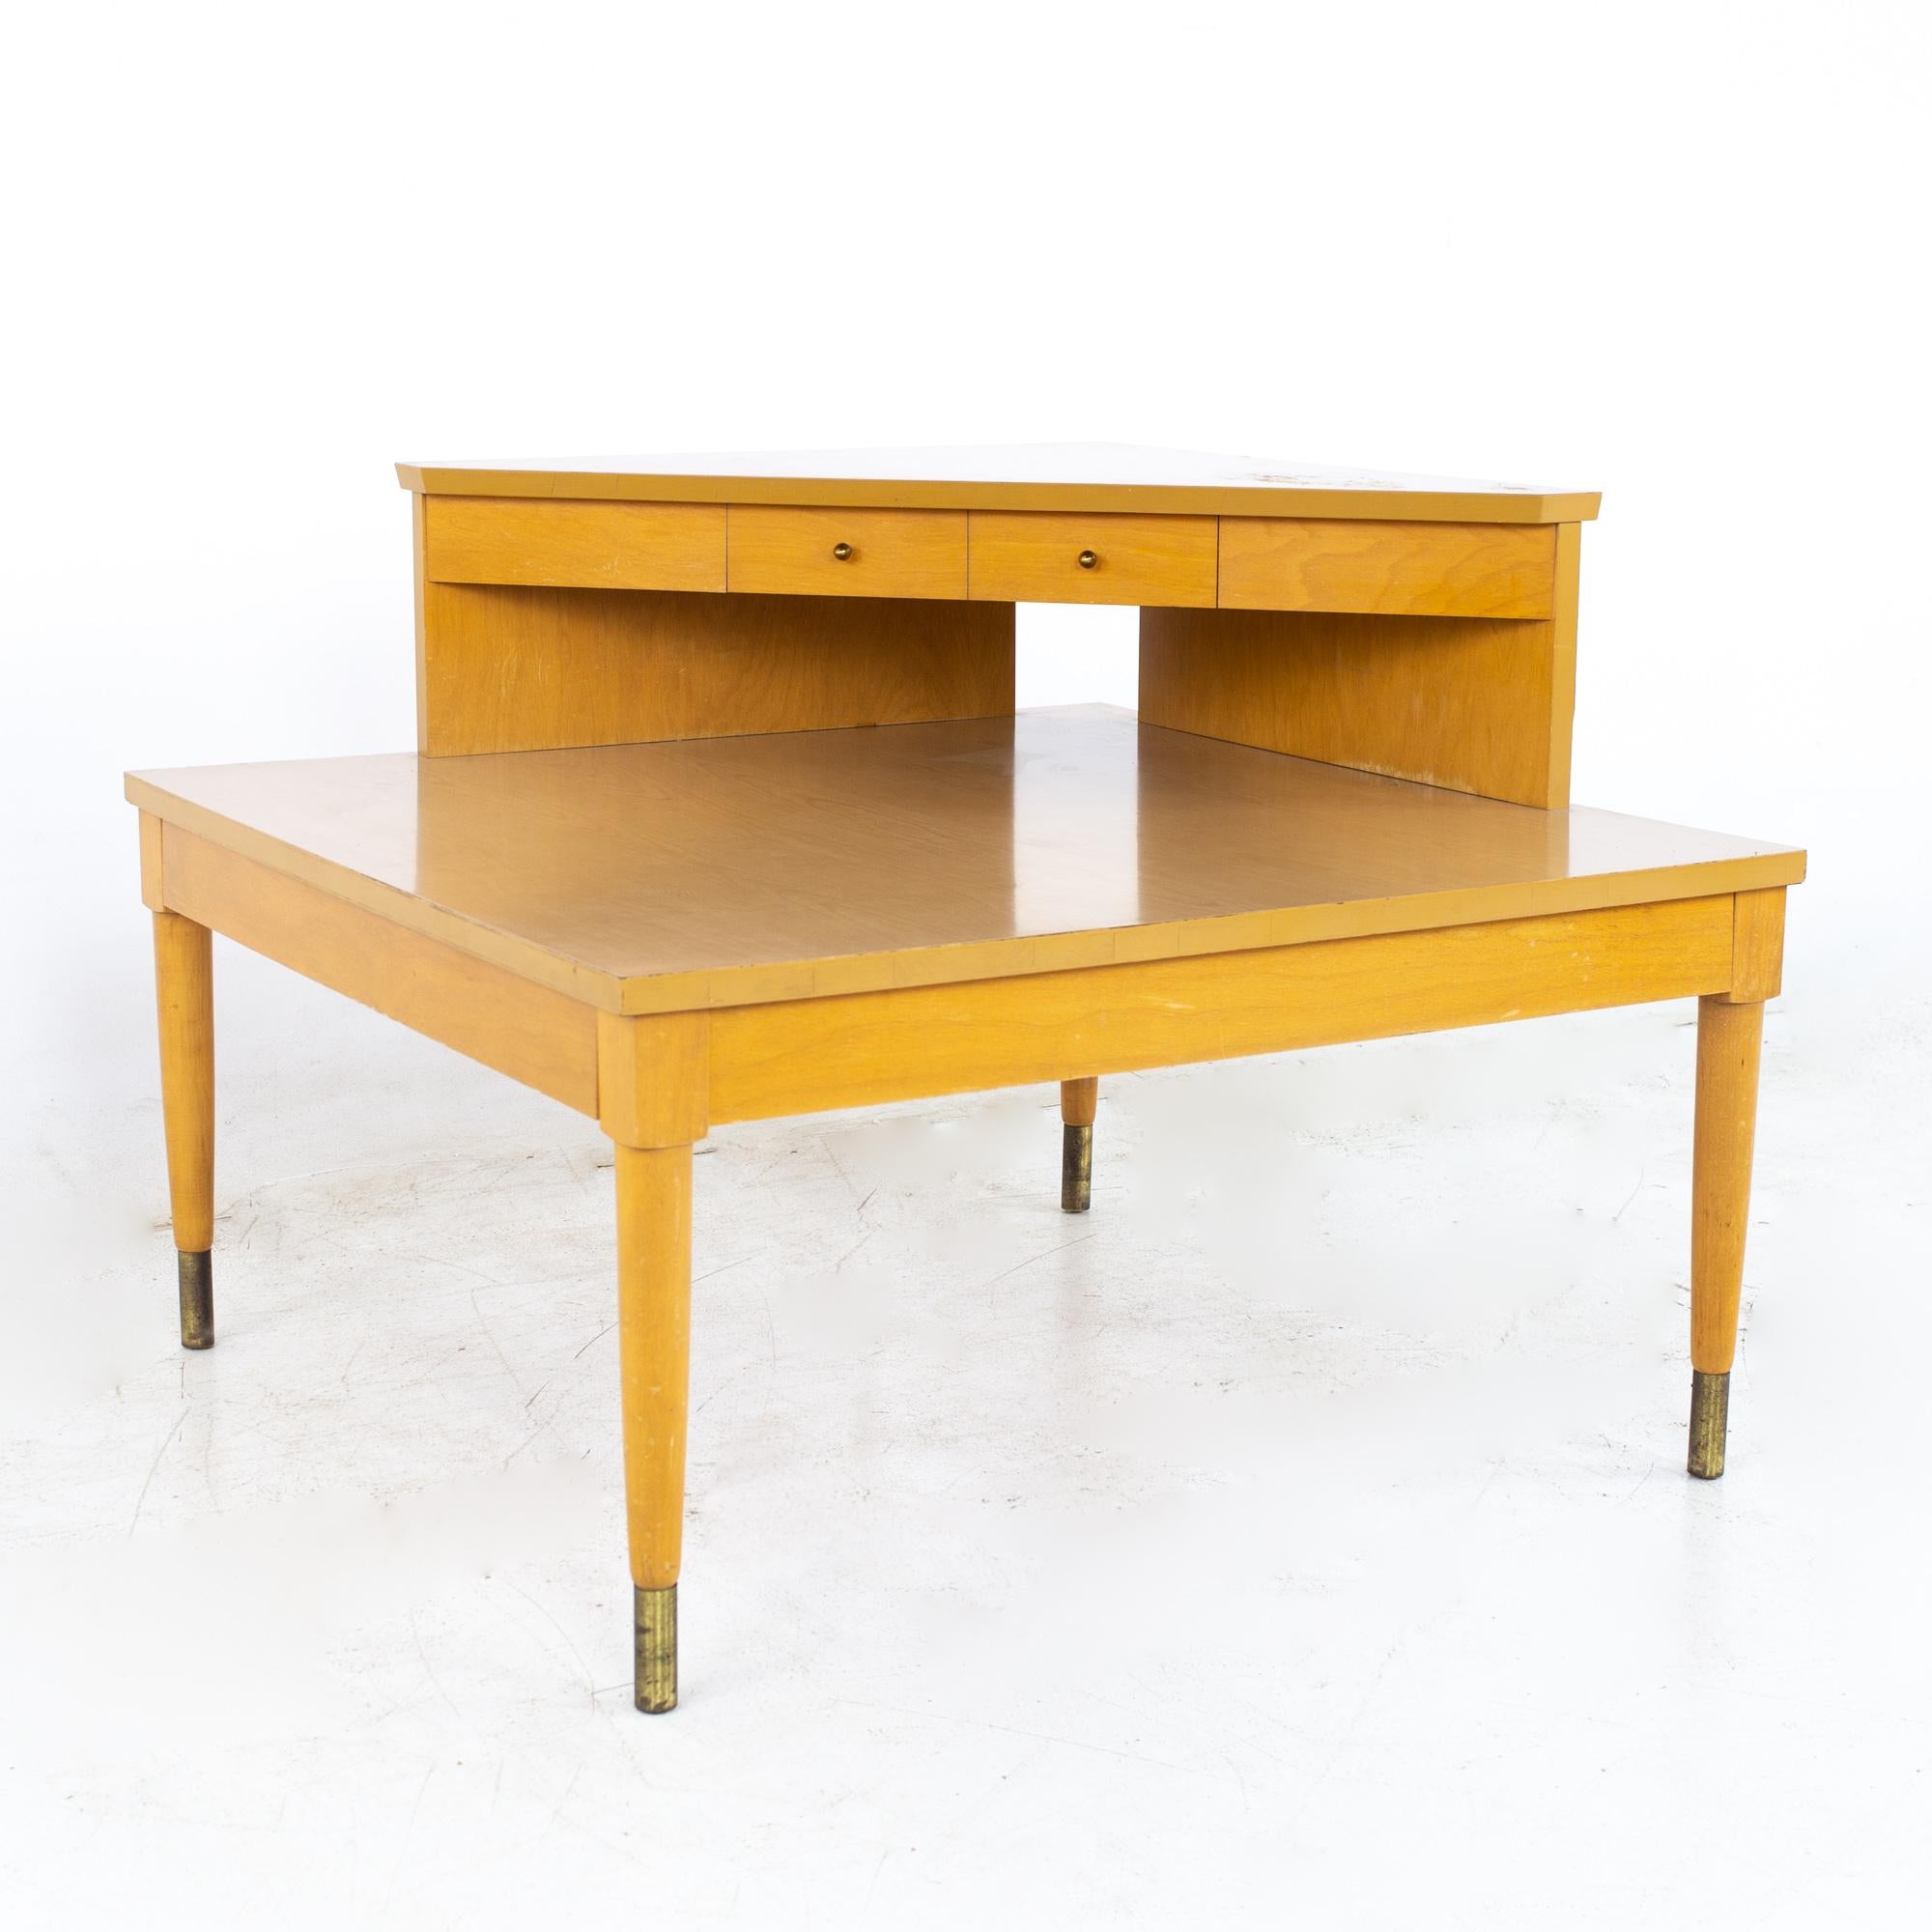 Heywood Wakefield mid century 2 tier corner table with drawers

Table measures: 32 wide x 32 deep x 24.5 inches high

?All pieces of furniture can be had in what we call restored vintage condition. That means the piece is restored upon purchase